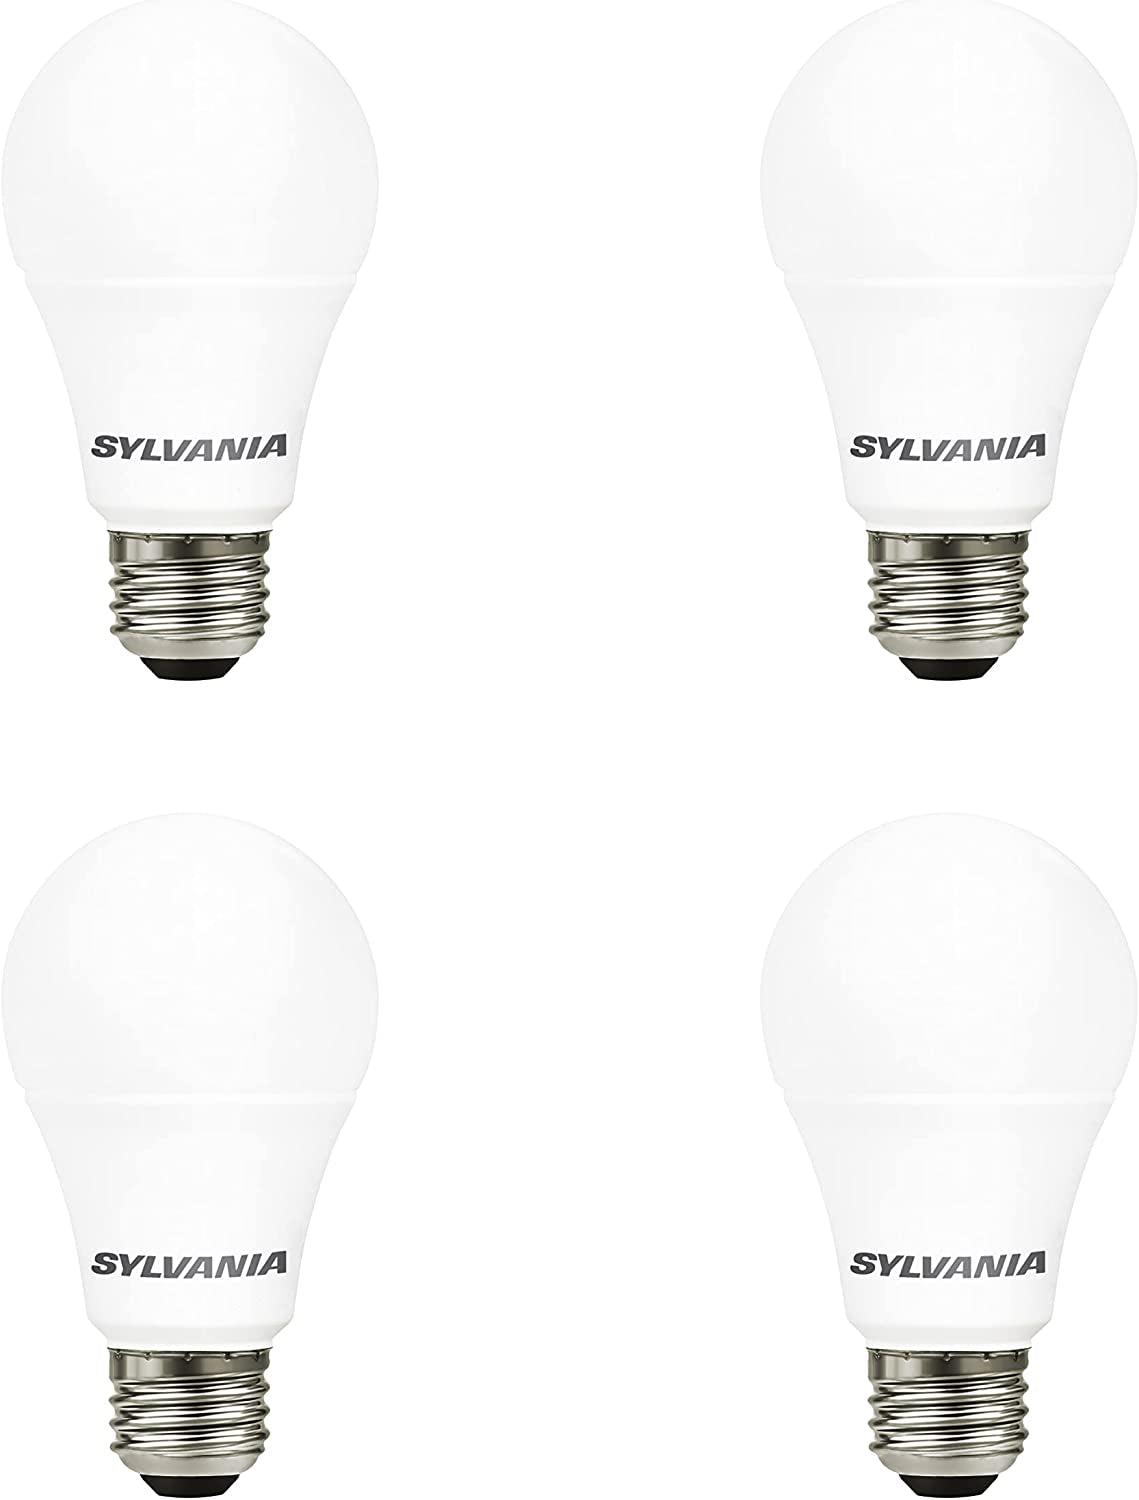 SYLVANIA LED A19 Light Bulb, 100W Equivalent, Efficient 14W, 1500 Lumens, Frosted Finish, Daylight - 4 Pack (78103)